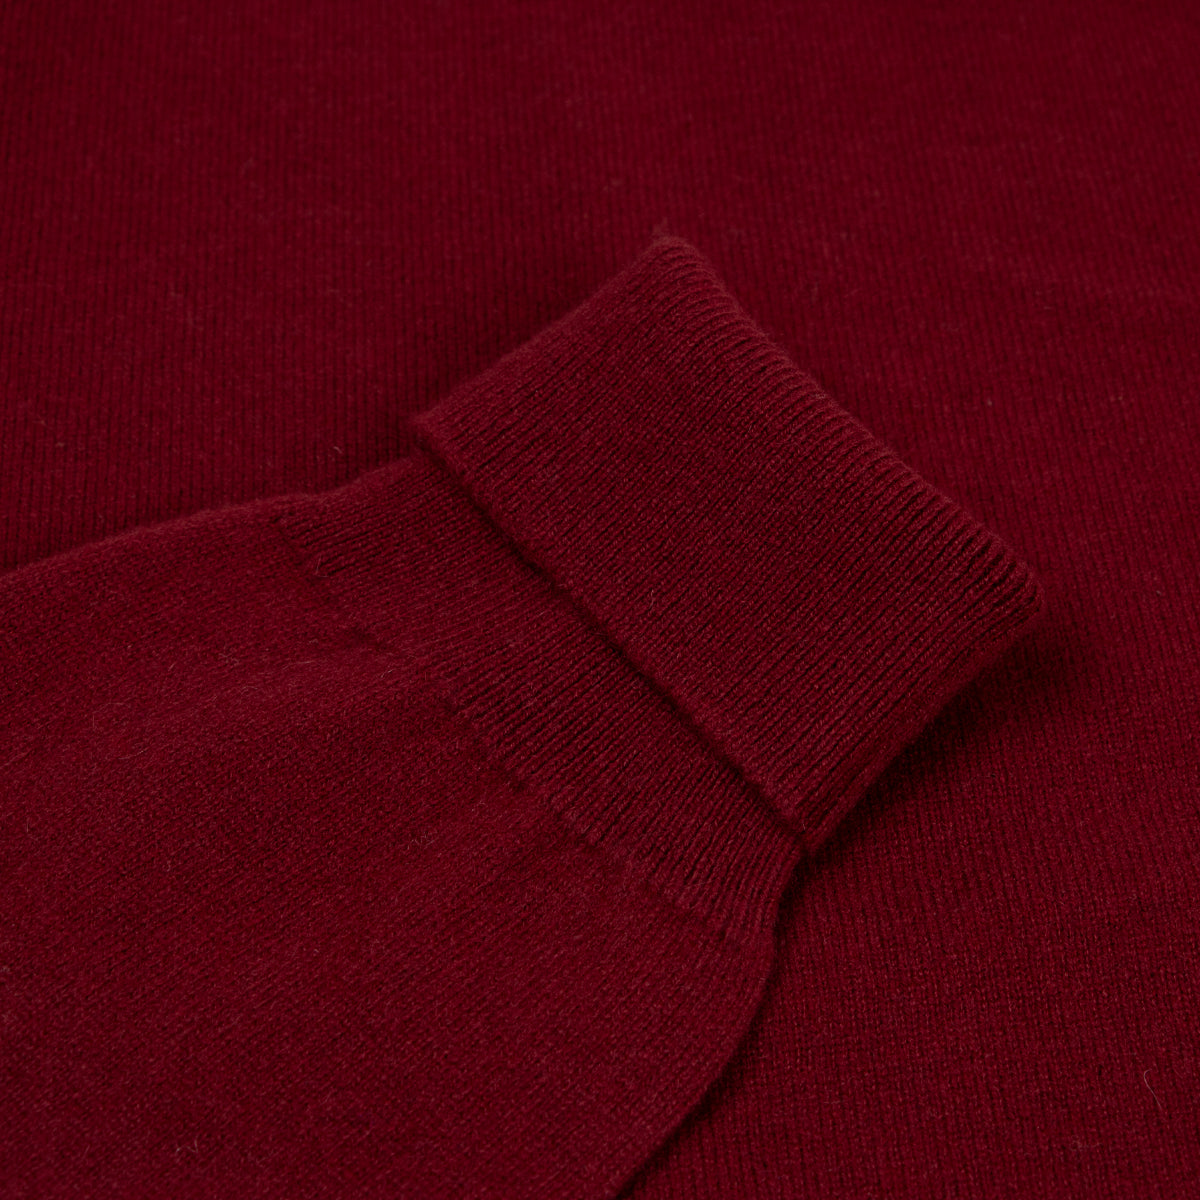 Claret Red Chatsworth 2ply V-Neck Cashmere Sweater  Robert Old   